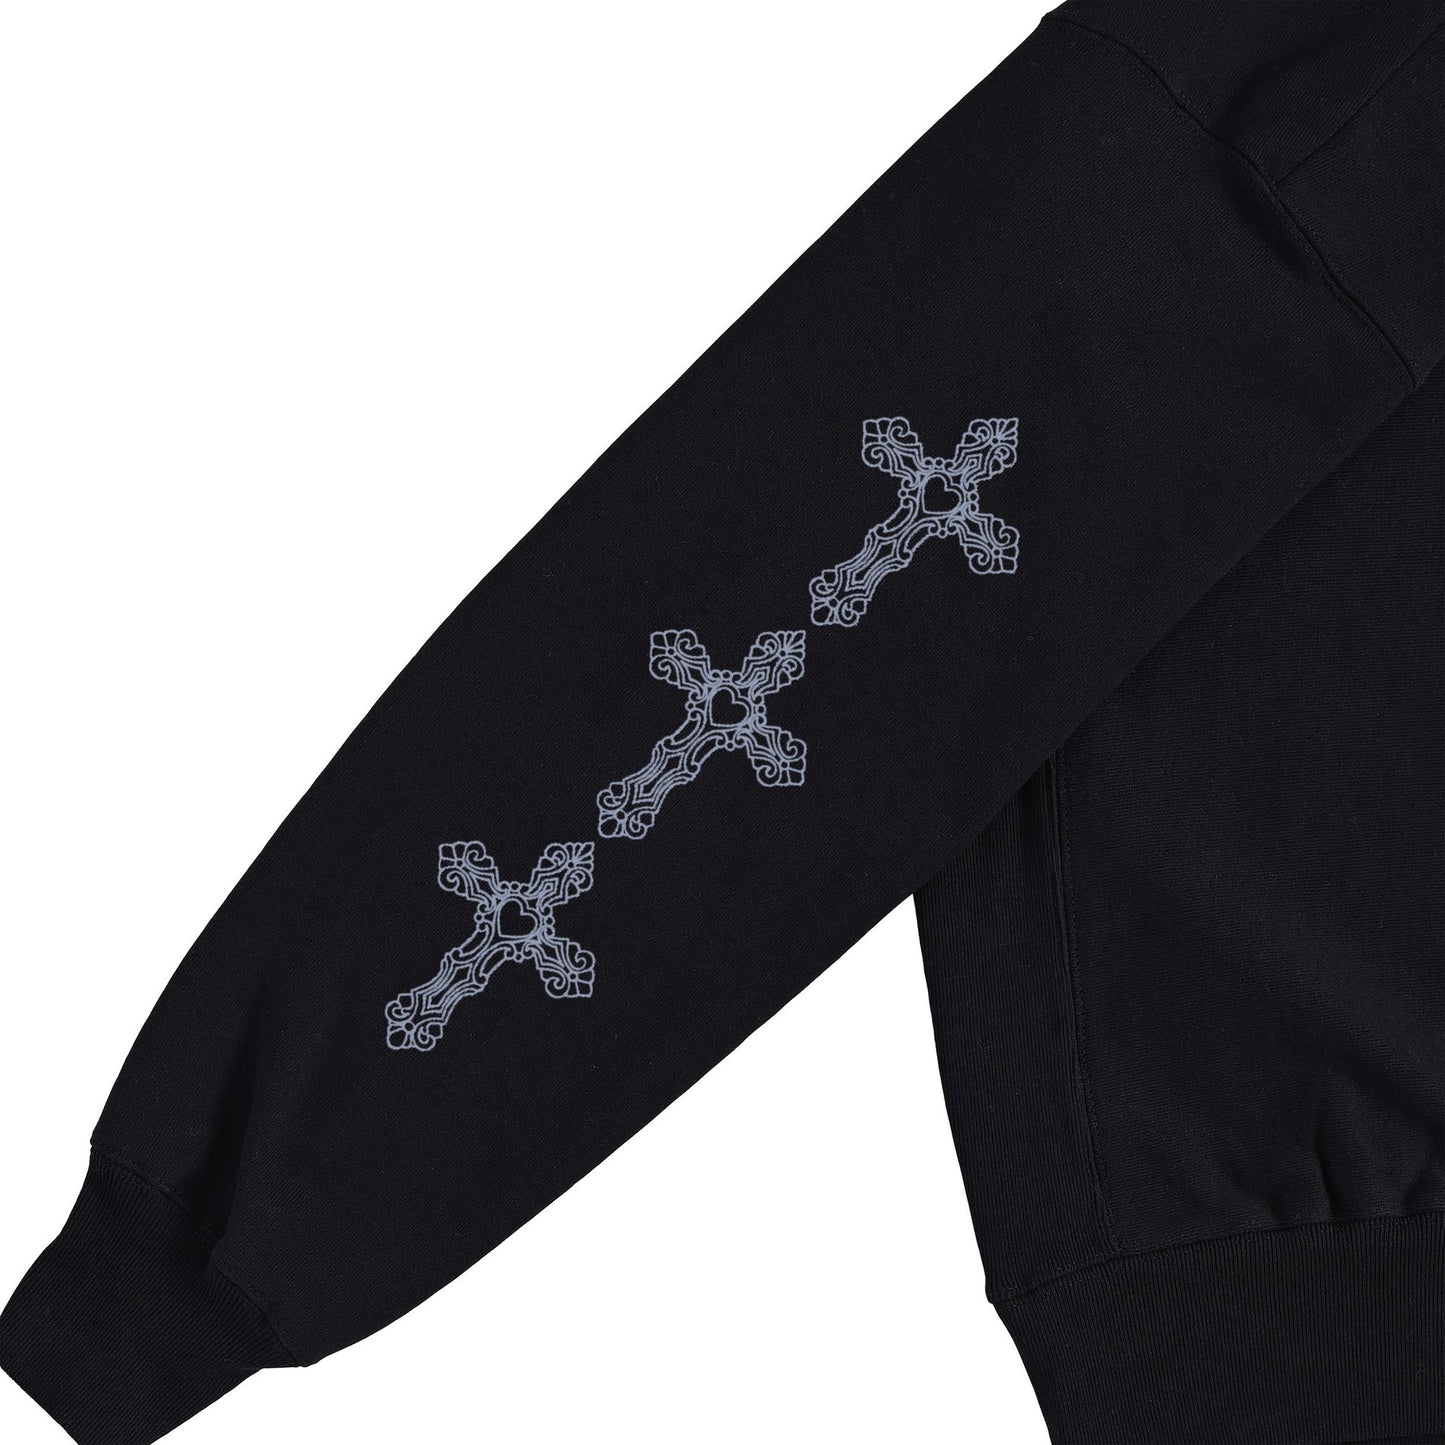 Blue Wing Gothic Cross SLD Hoodie